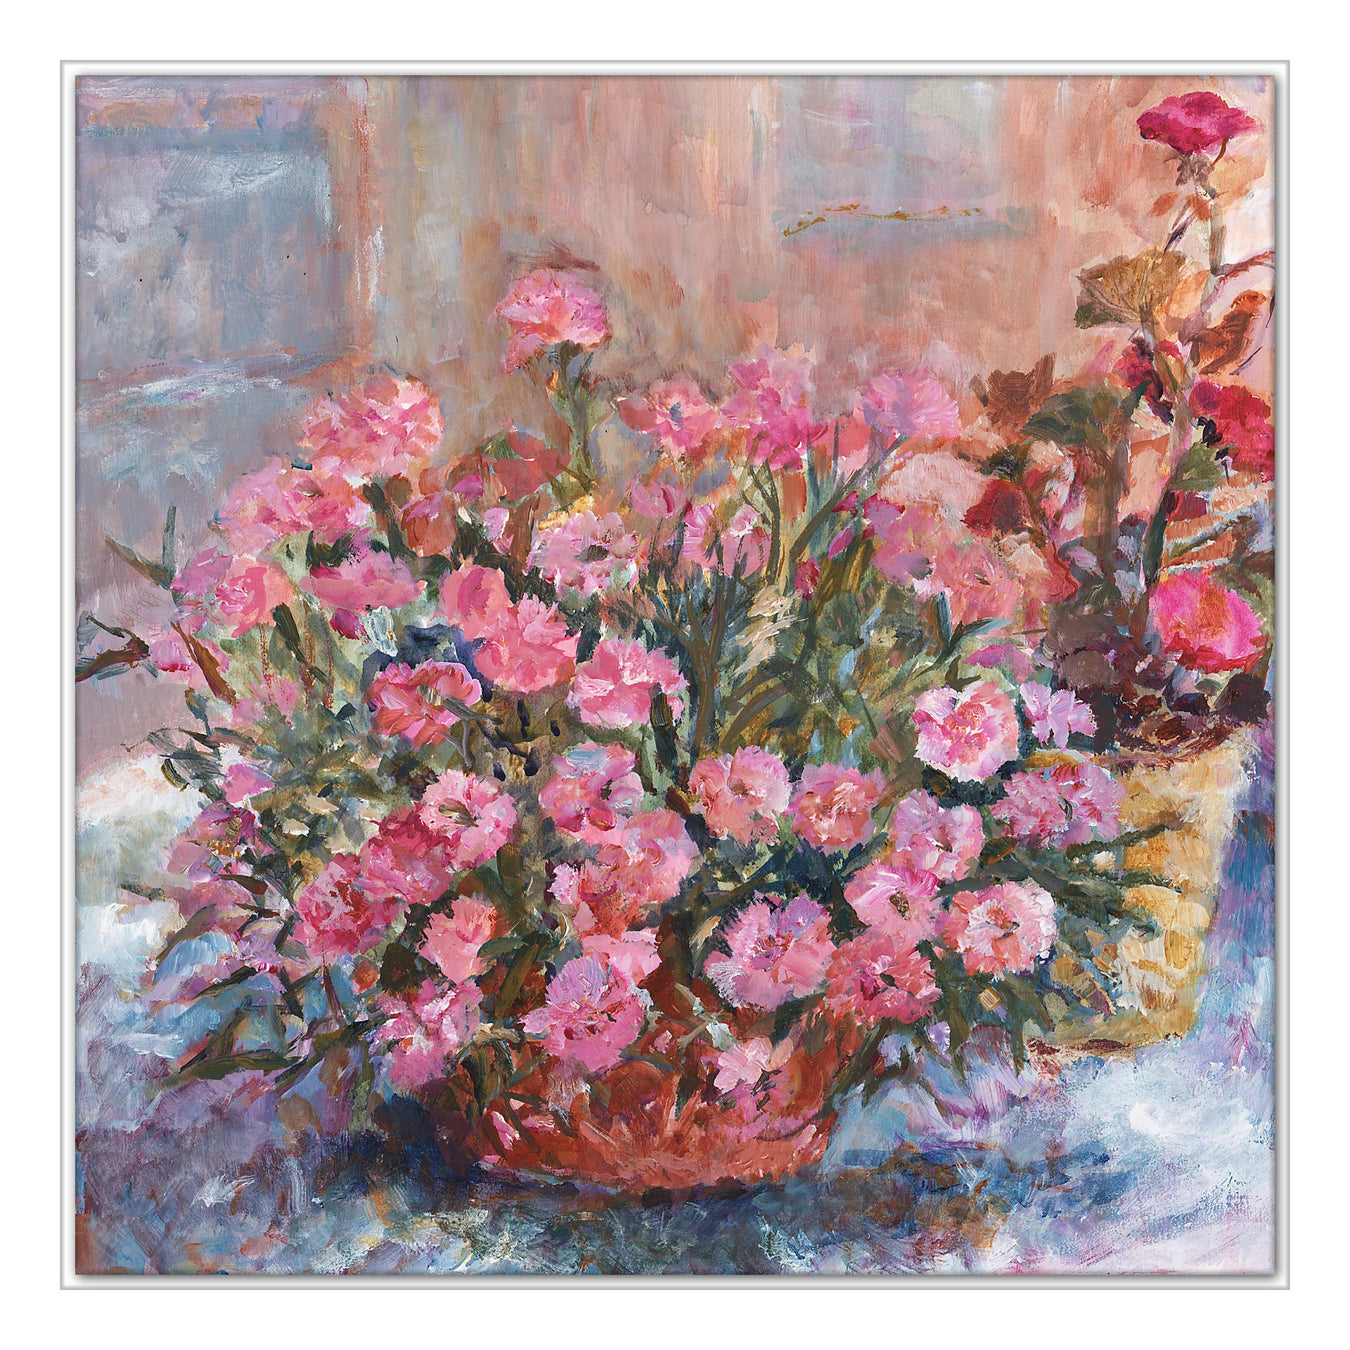 Floral Canvas Prints. Explore an exciting and varied collection of floral canvas art prints. Rich in colour from delicate pastel hues to vibrant exotic tones and with many favourite flowers.